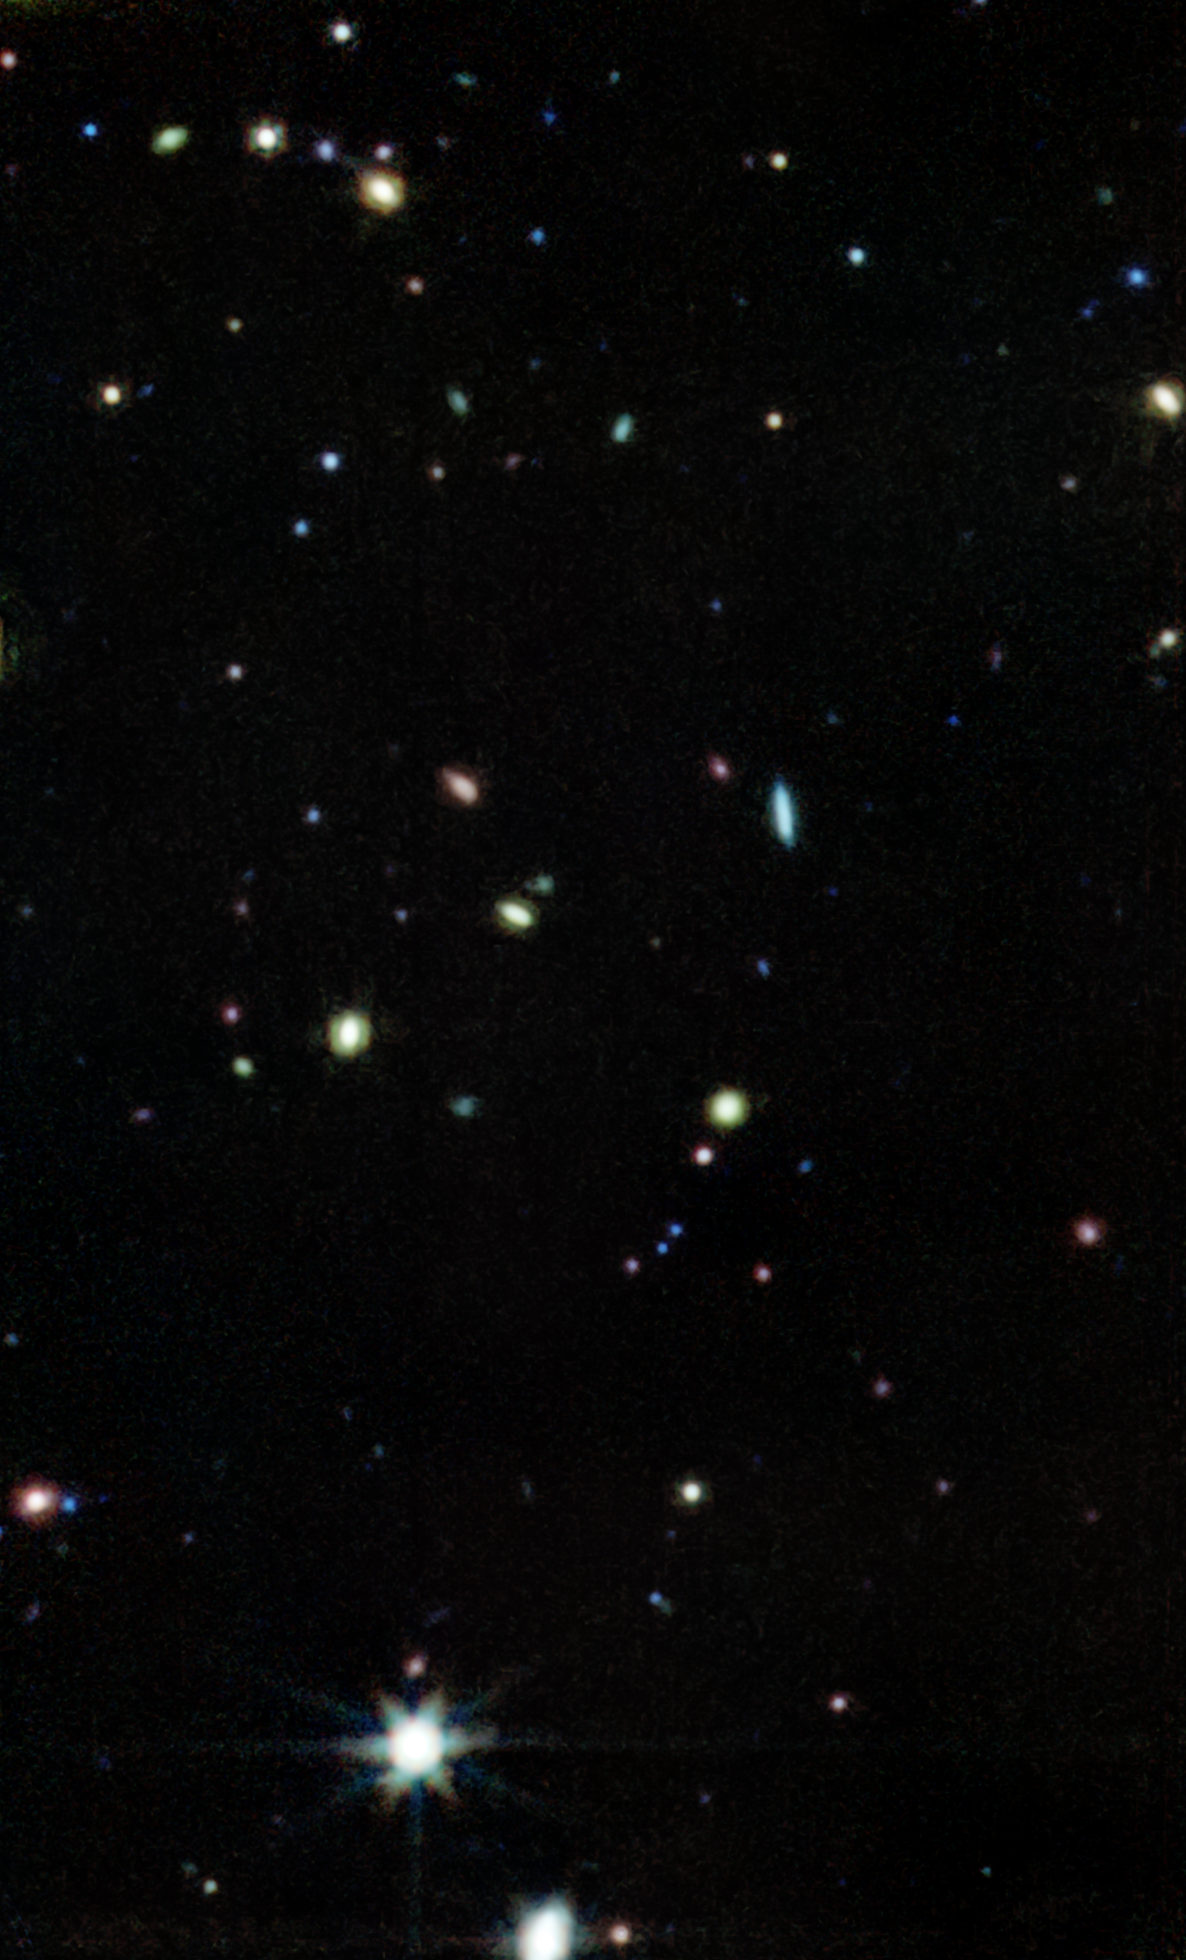 This is a photograph taken with MIRI, the Mid-Infrared Instrument. A region of the sky is visible close to the tail of the Big Dipper. The image revealed how galaxies in dense interstellar gas and dust form new stars, which can be difficult to study with optical telescopes such as Hubble. It's one of the first images produced by the CEERS collaboration. Image Credit: NASA; STScI; CEERS; TACC; S. Finkelstein; G. Yang; C. Papovich; Z. Leva.